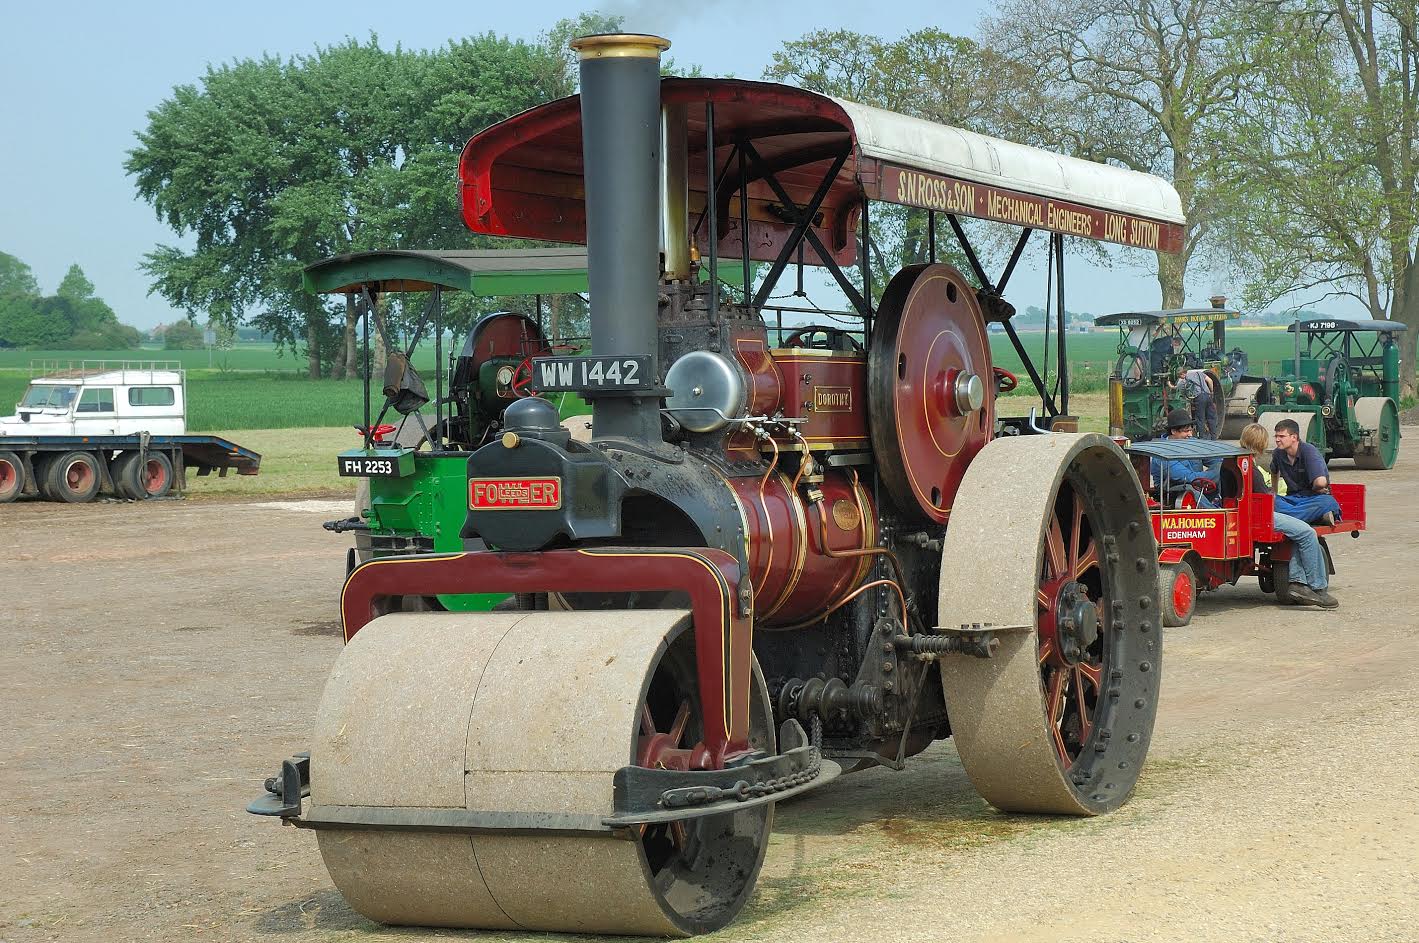 Over £237,000 spent on four steam engines